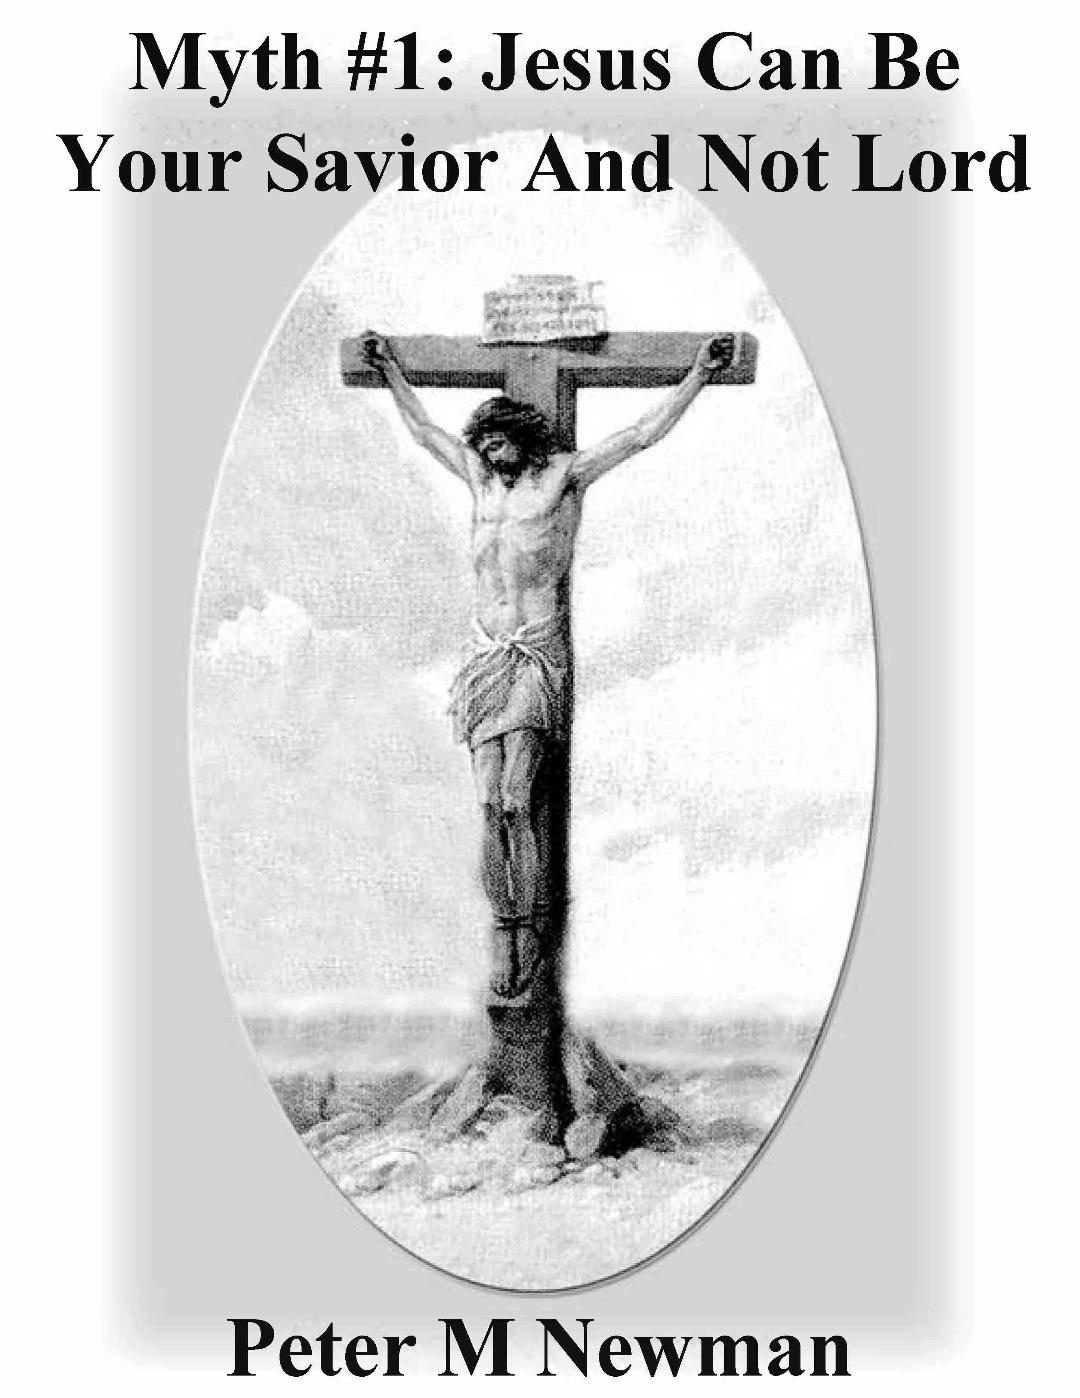 Jesus Can Be Your Savior and Not Your Lord – Myth #1